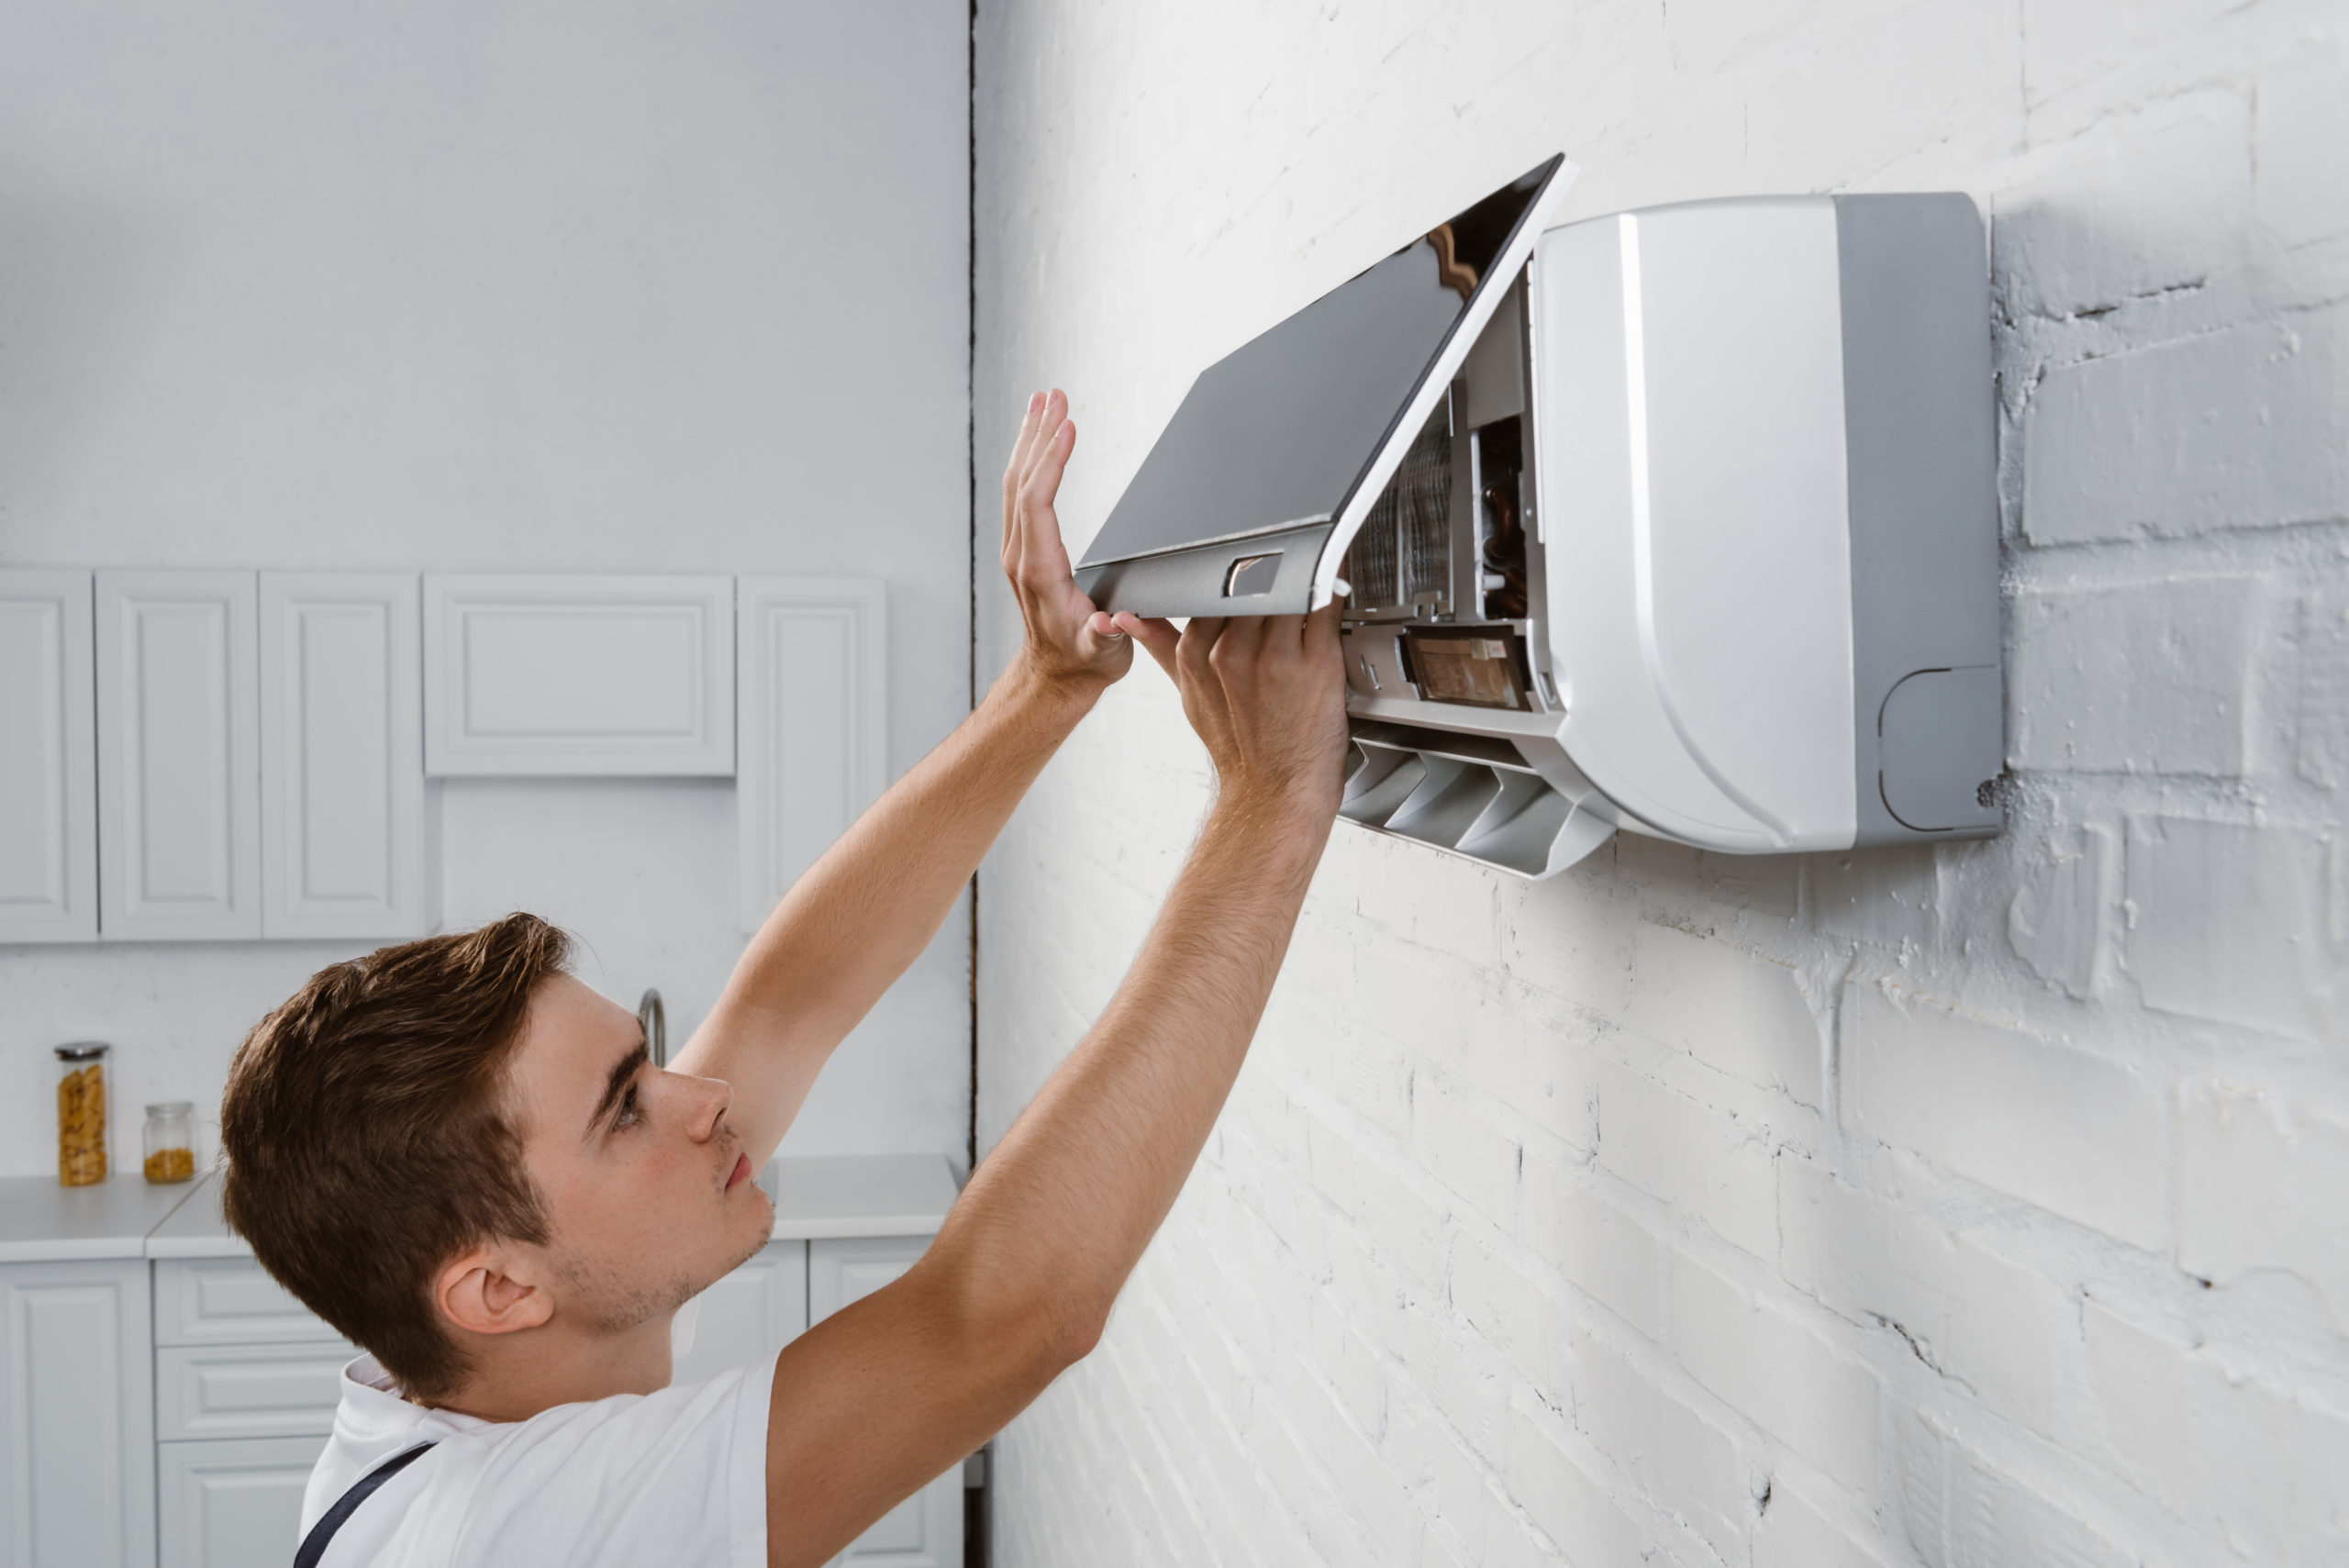 Common Causes of Restricted Airflow in Your Home